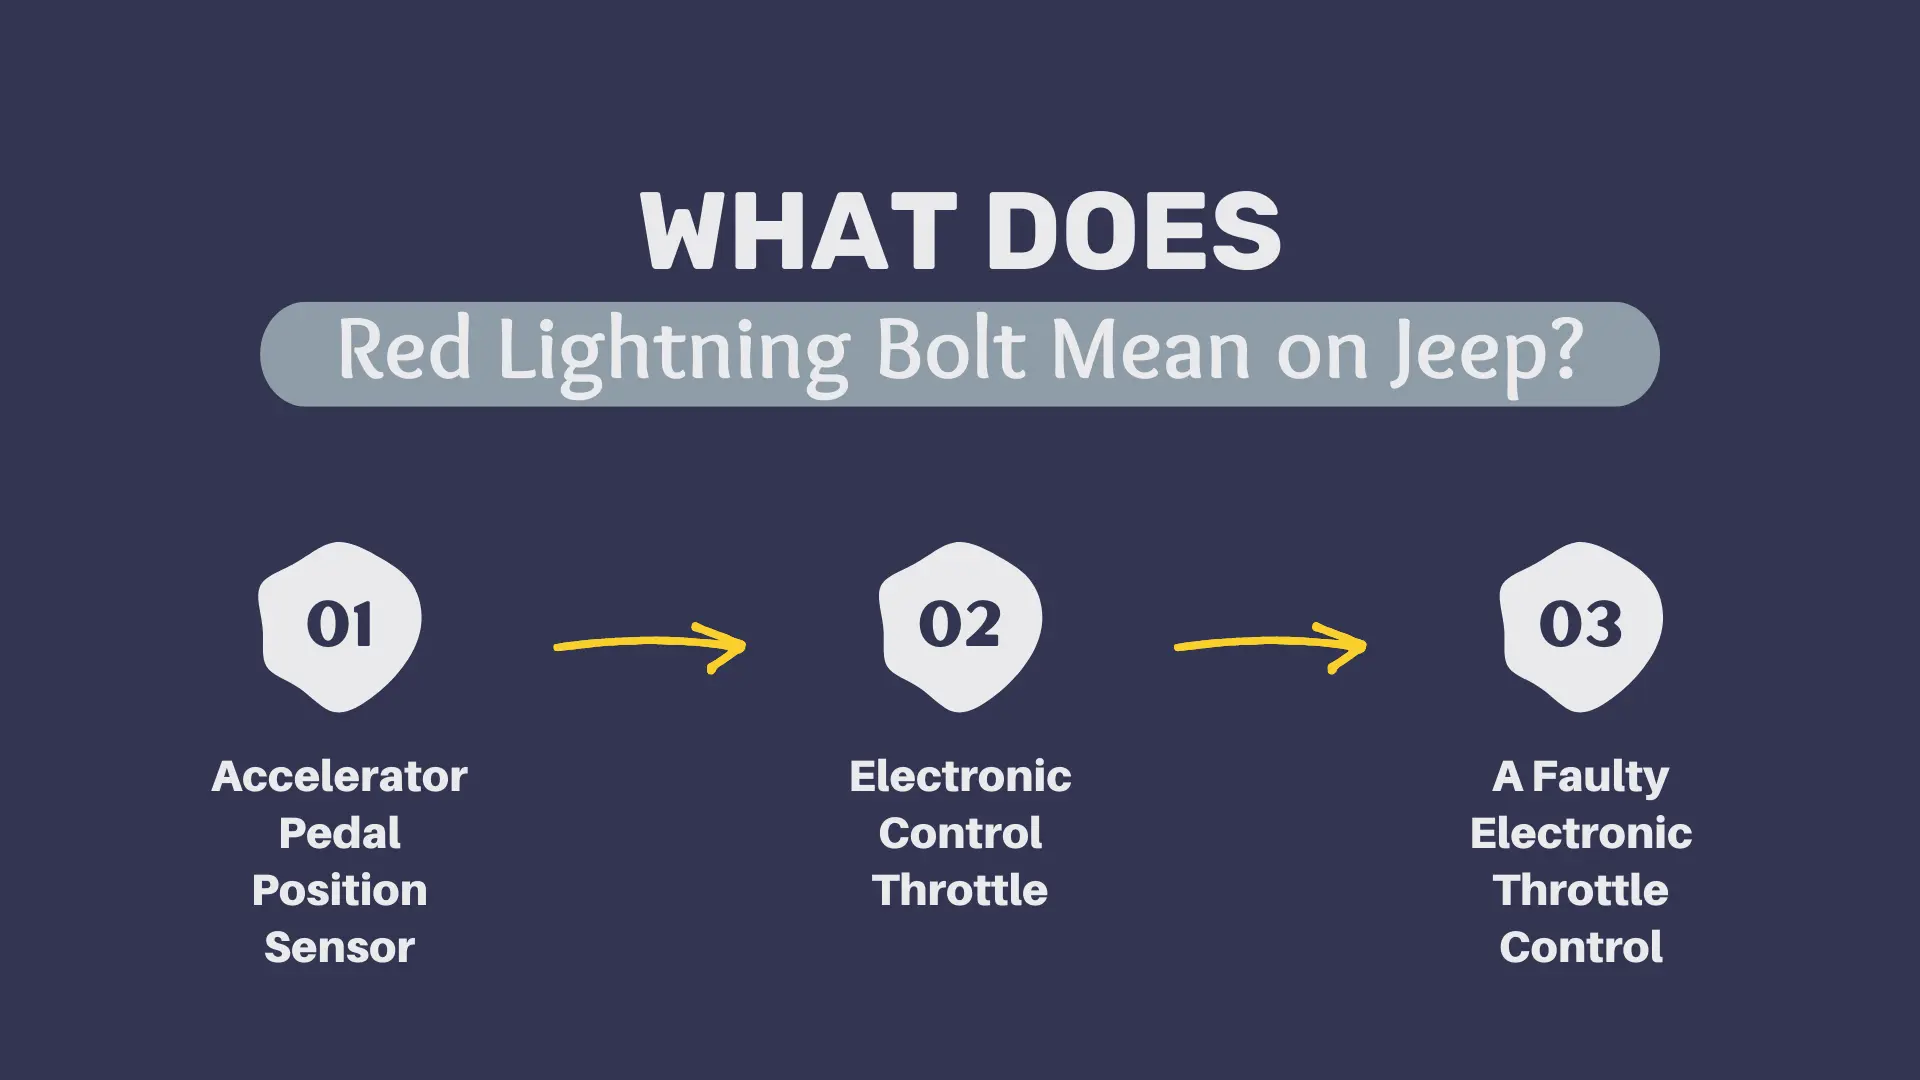 What Does Red Lightning Bolt Mean on Jeep